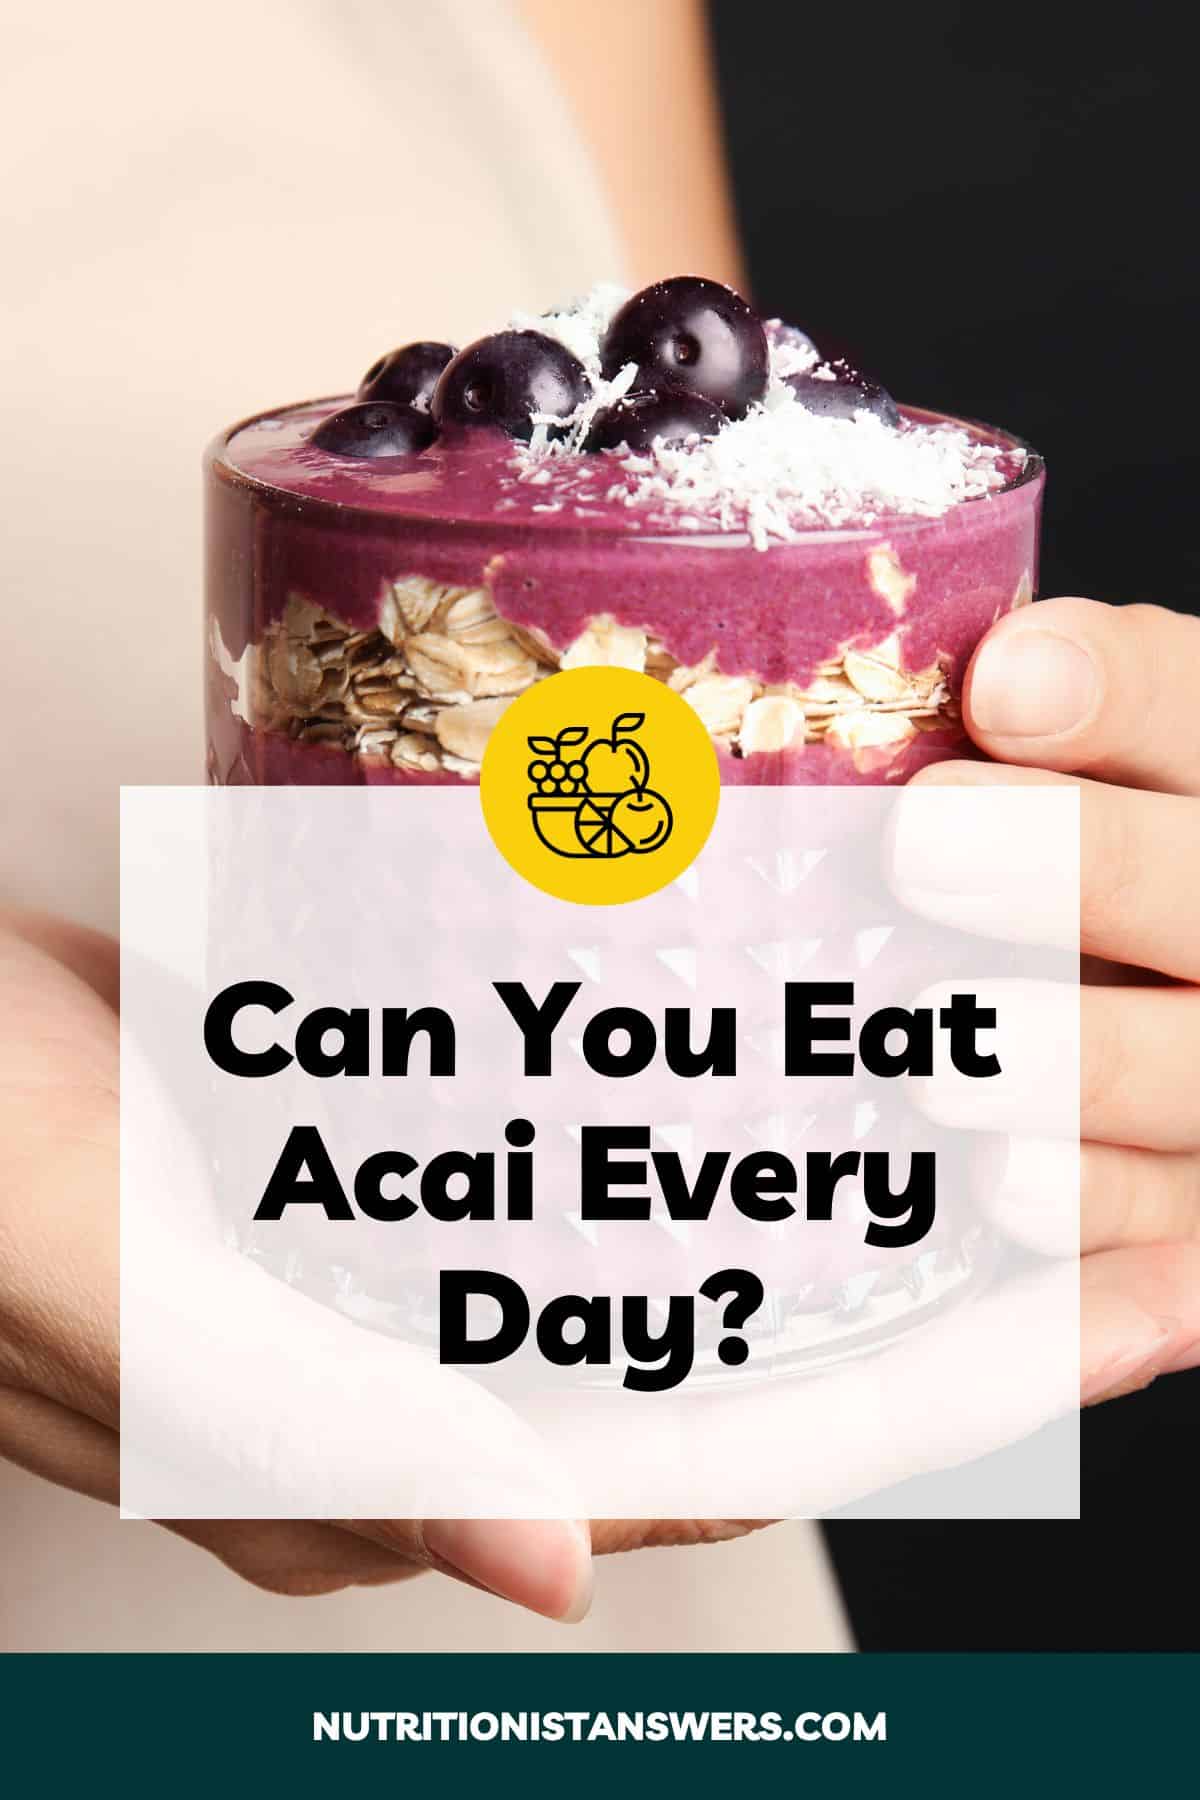 Can You Eat Acai Every Day?